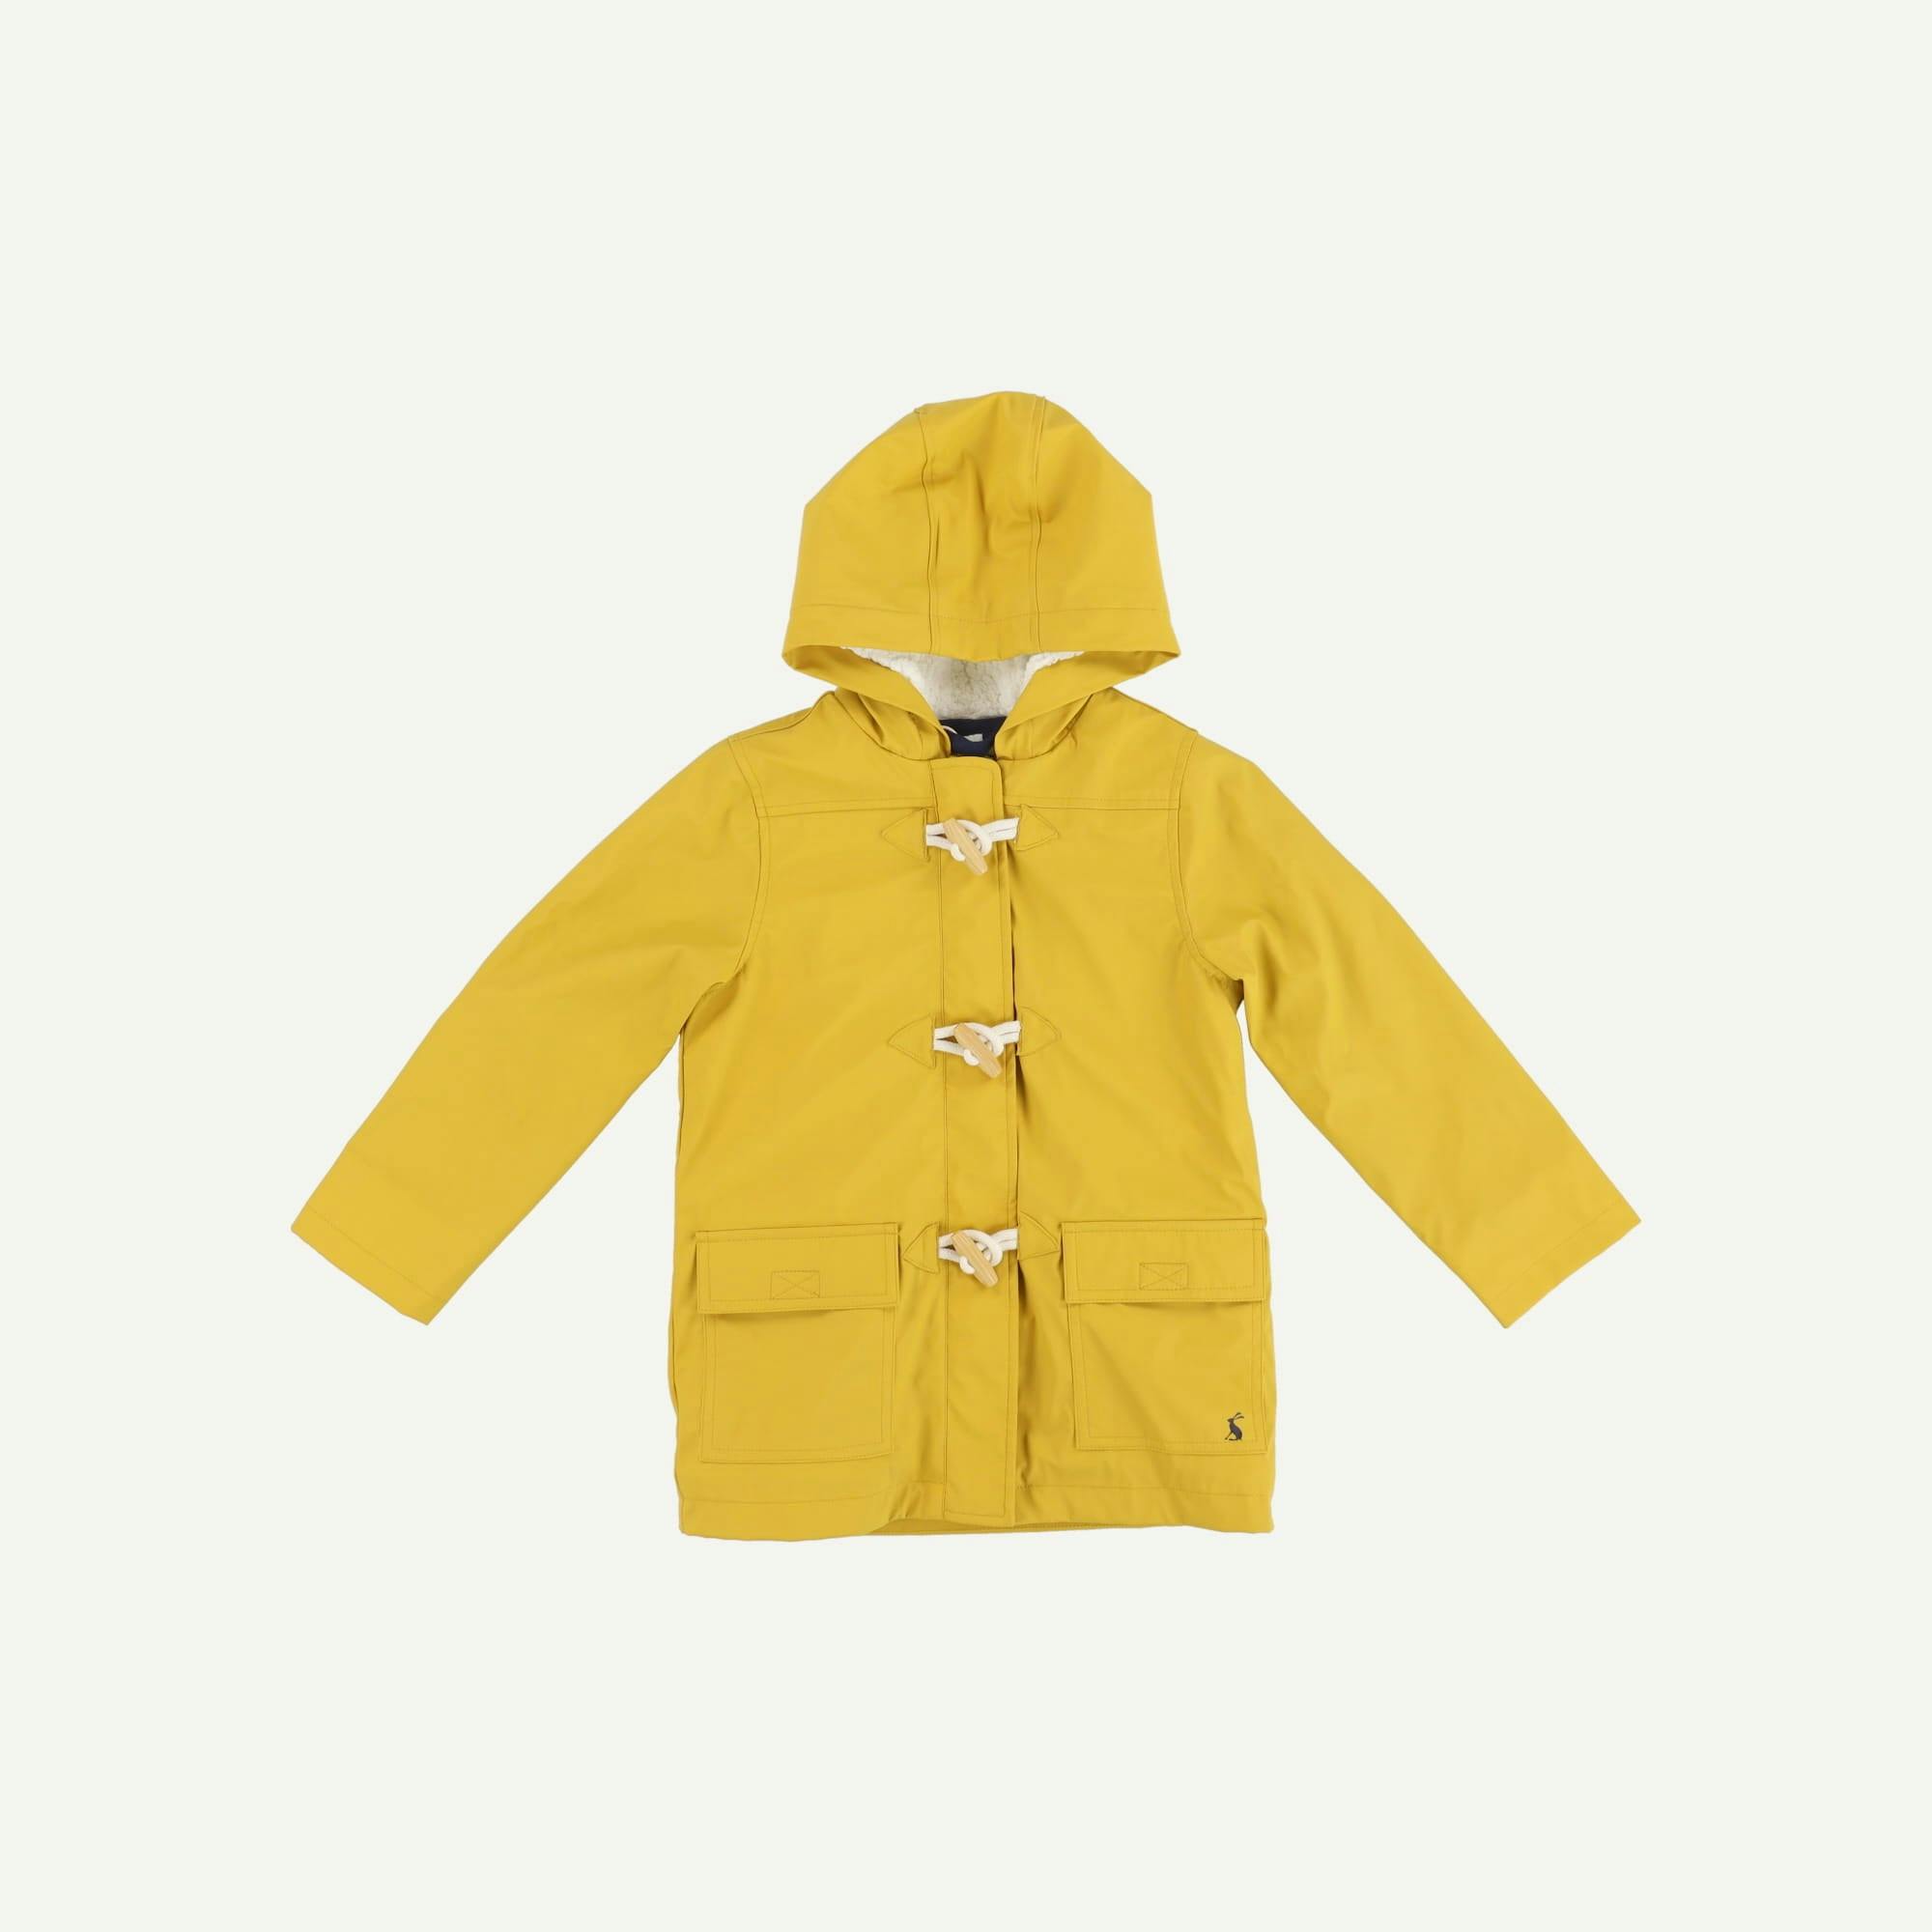 Joules As new Yellow Coat